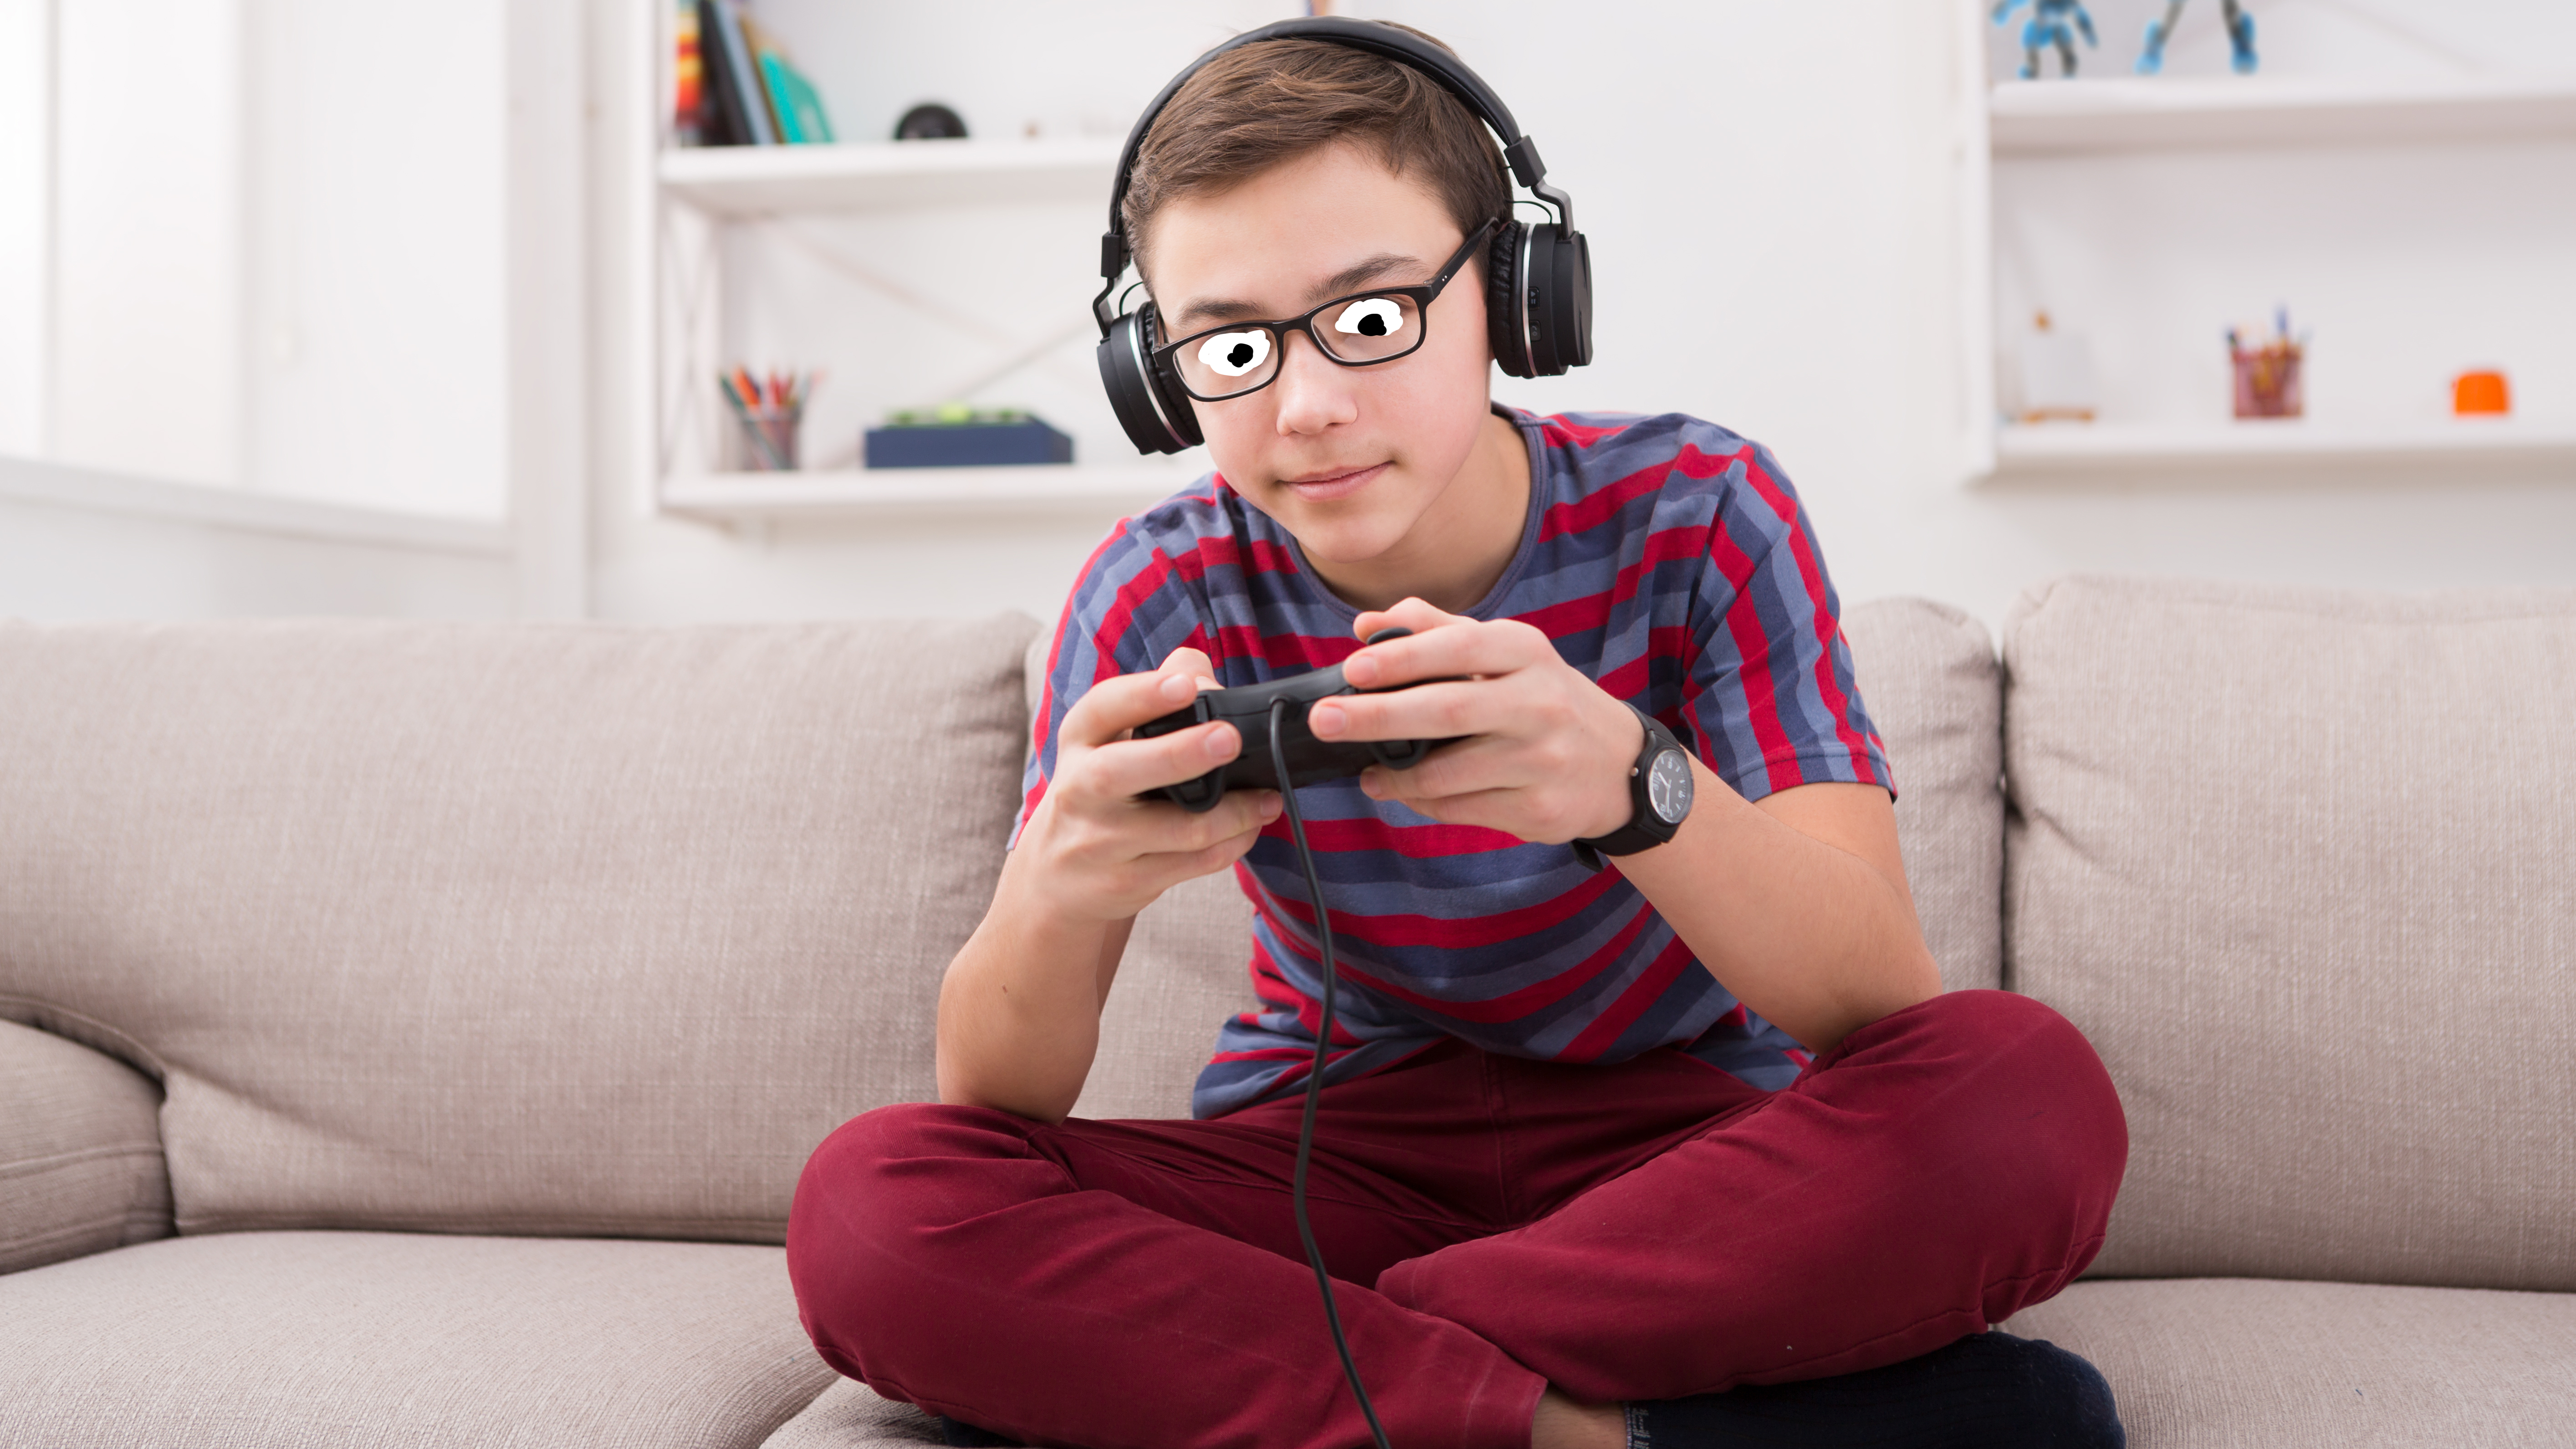 Kid playing a video game